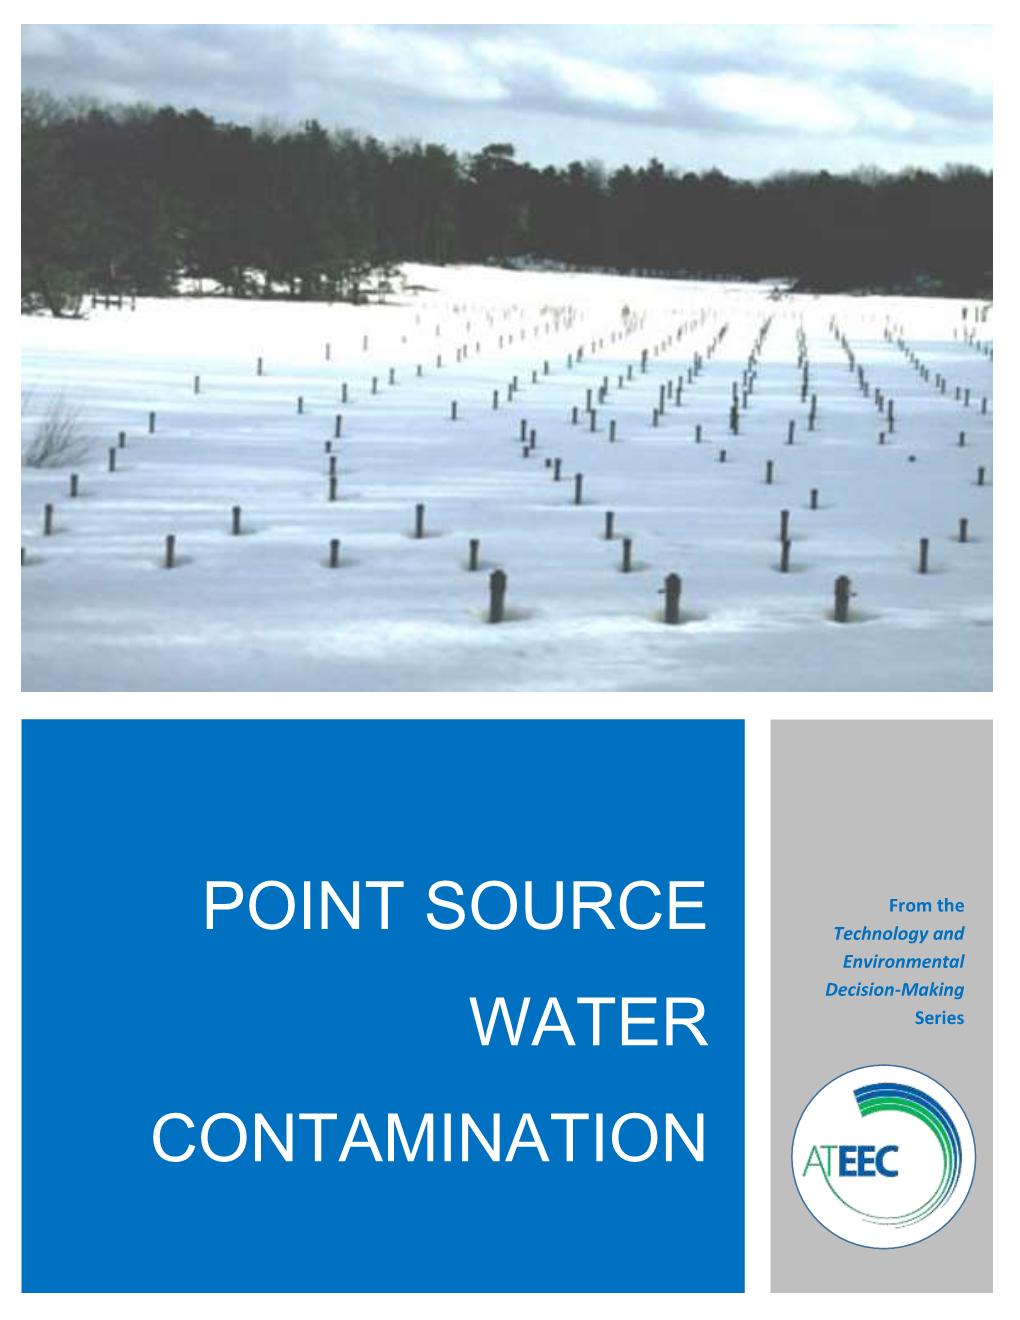 Point Source Water Contamination Module Was Originally Published in 2003 by the Advanced Technology Environmental and Energy Center (ATEEC)